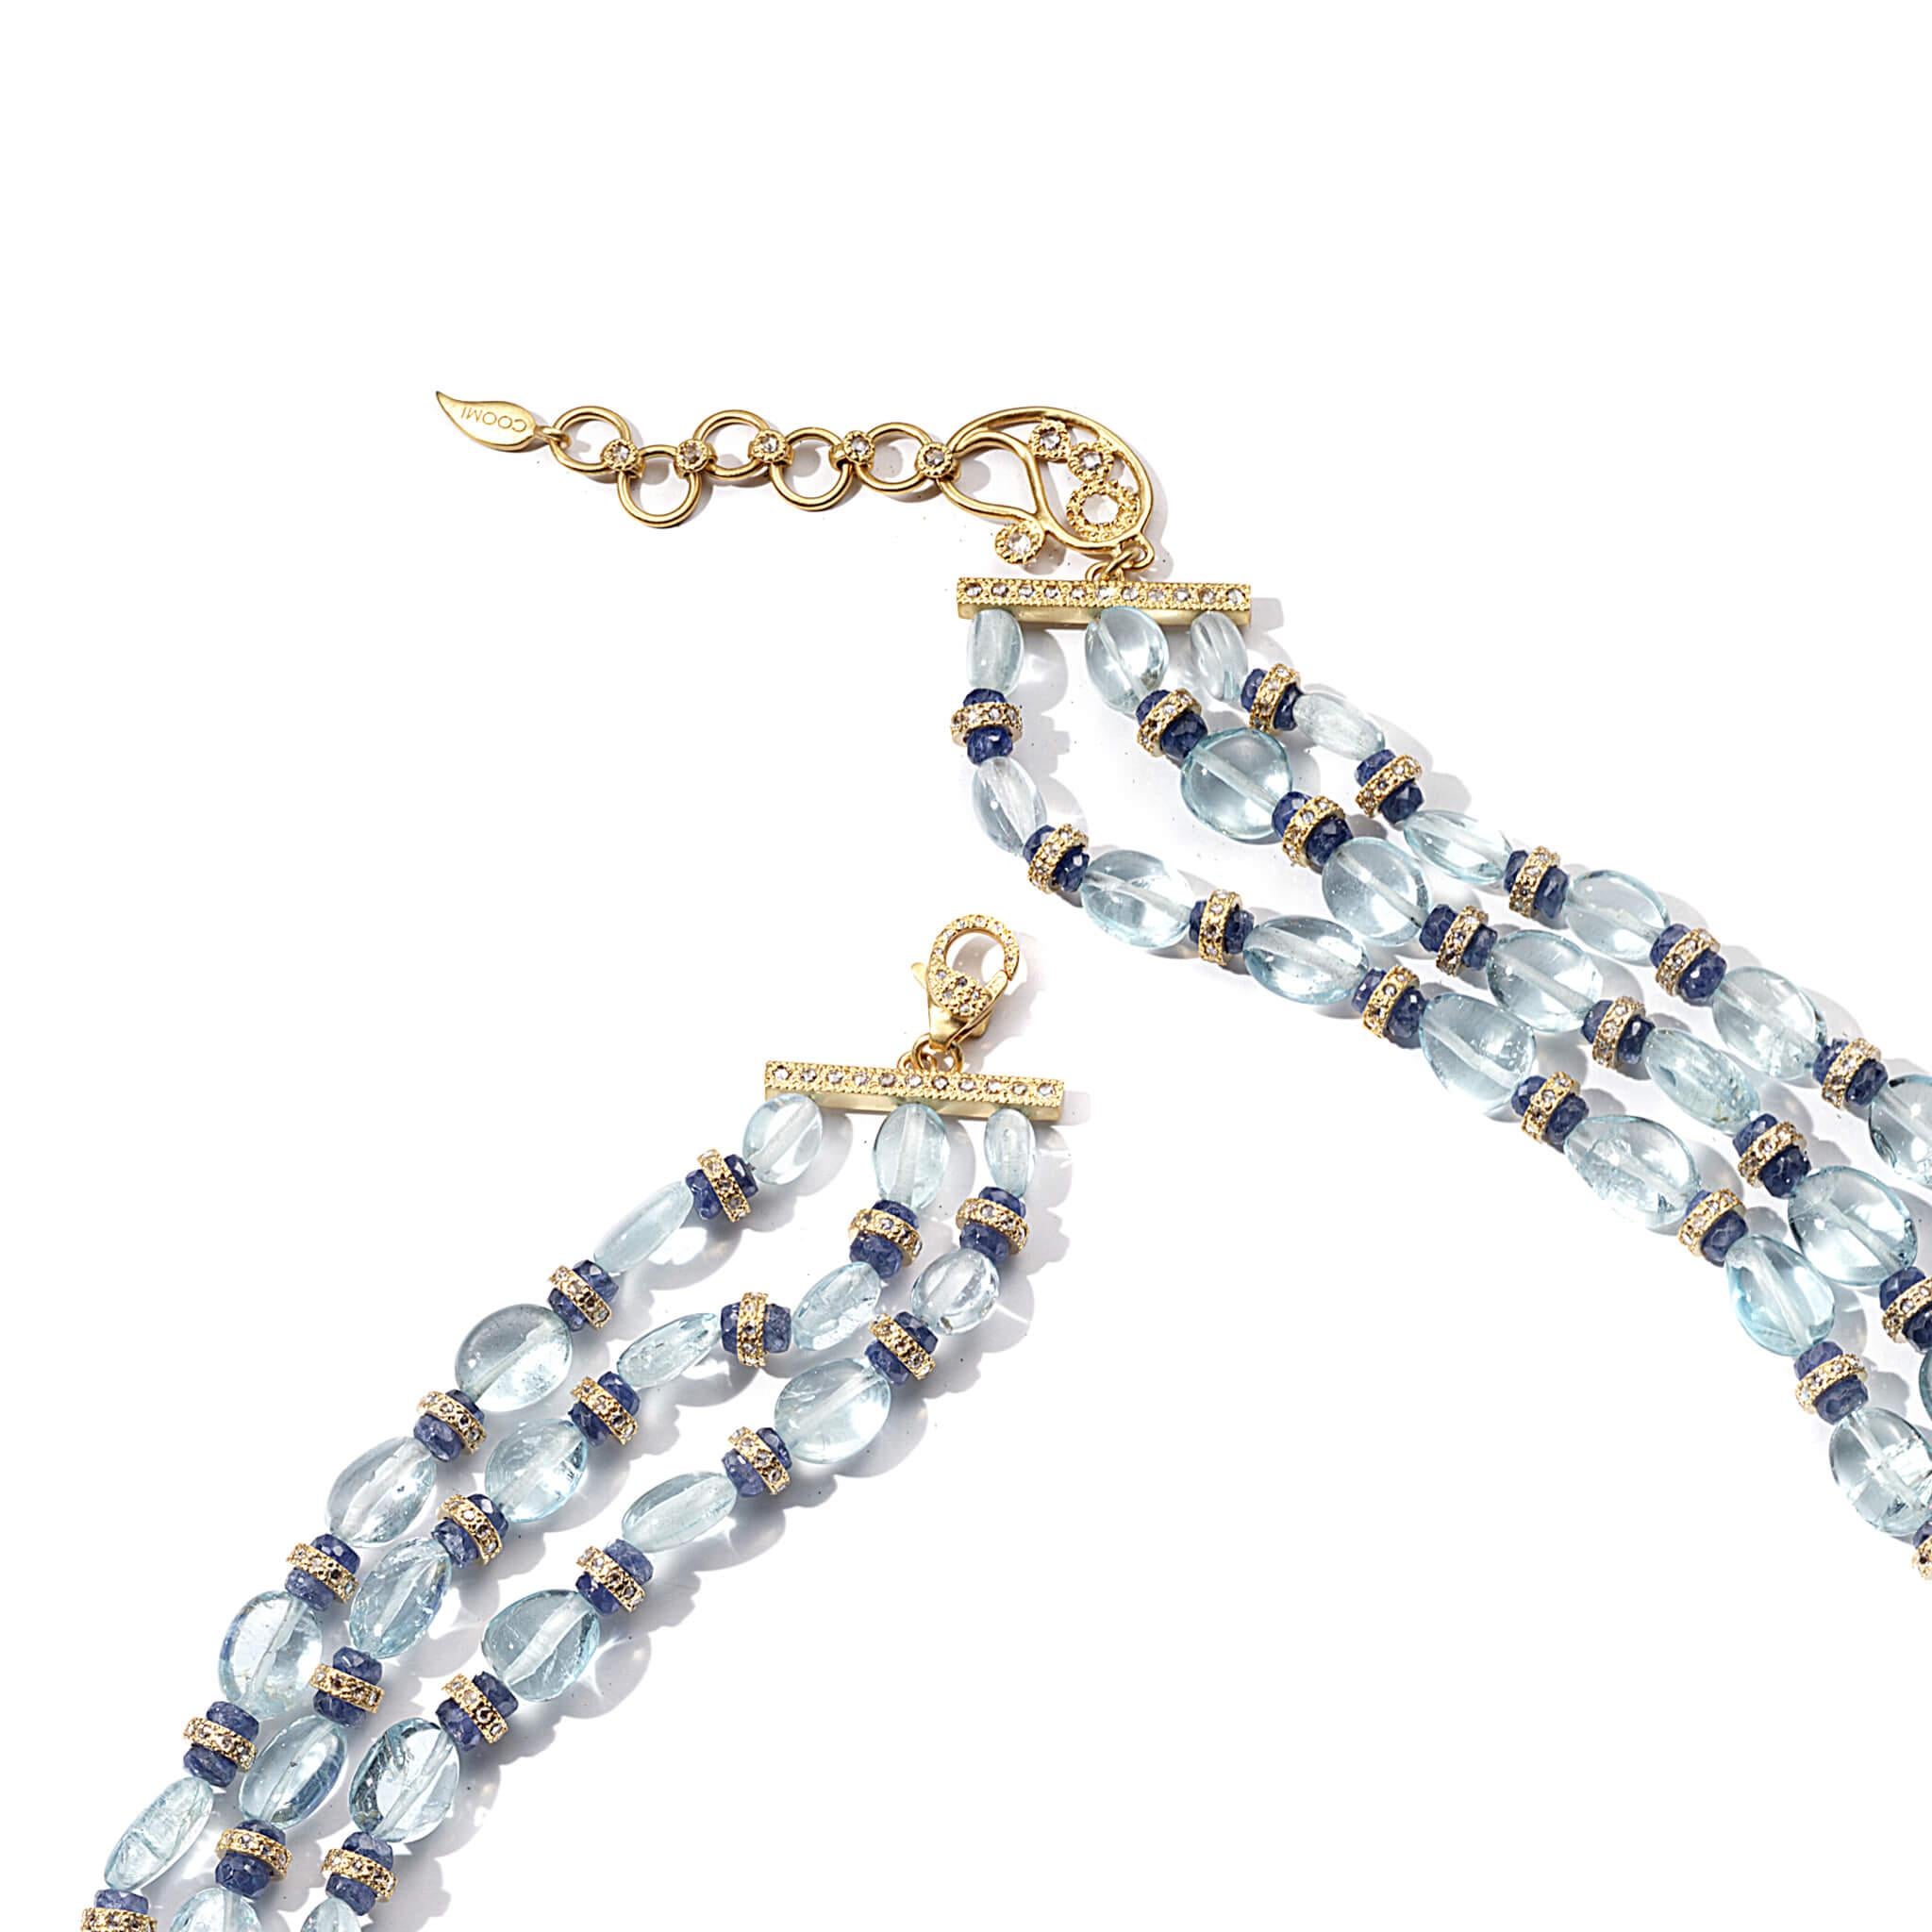 Affinity 16 Inch Necklace with 4.84CTS of Diamonds, 244.08CTS of Aquamarine Tumbled Beads, and 38.72CTS of Blue Sapphire Beads. Set in 20K Gold. Extender available for longer attachment.